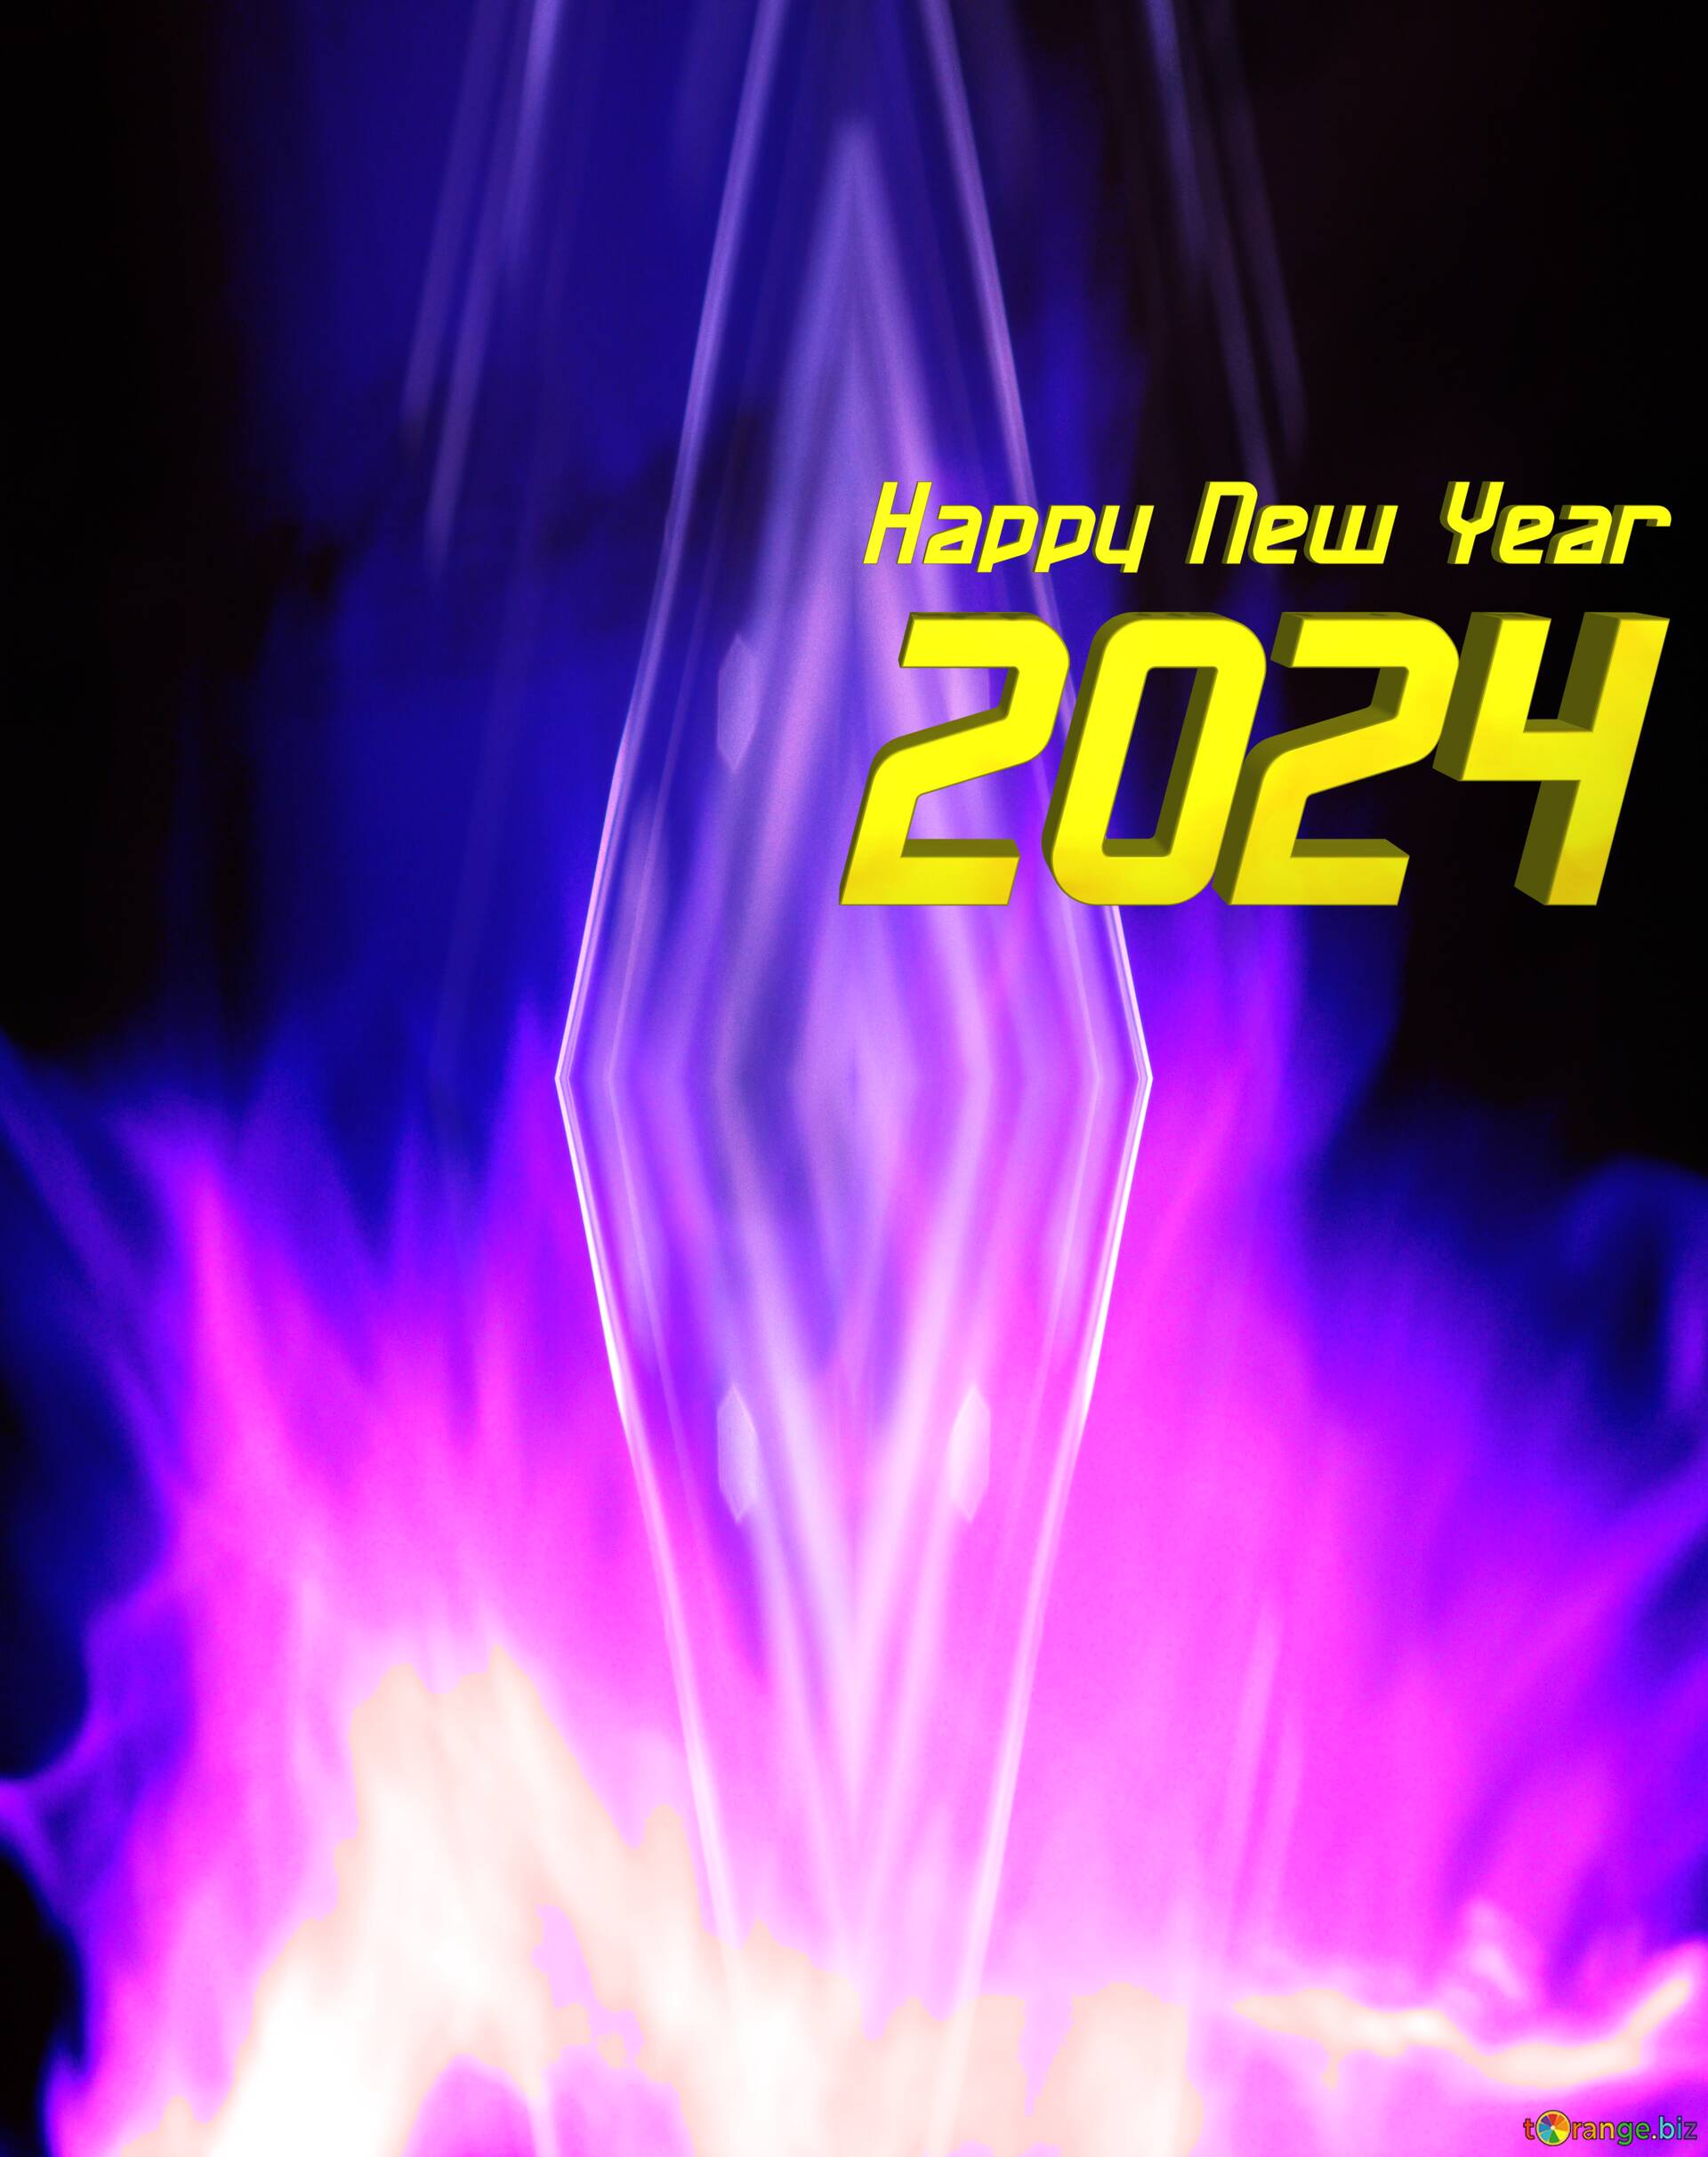 Download free picture happy new year 2022 art abstract Background on CC-BY  License ~ Free Image Stock  ~ fx №209636